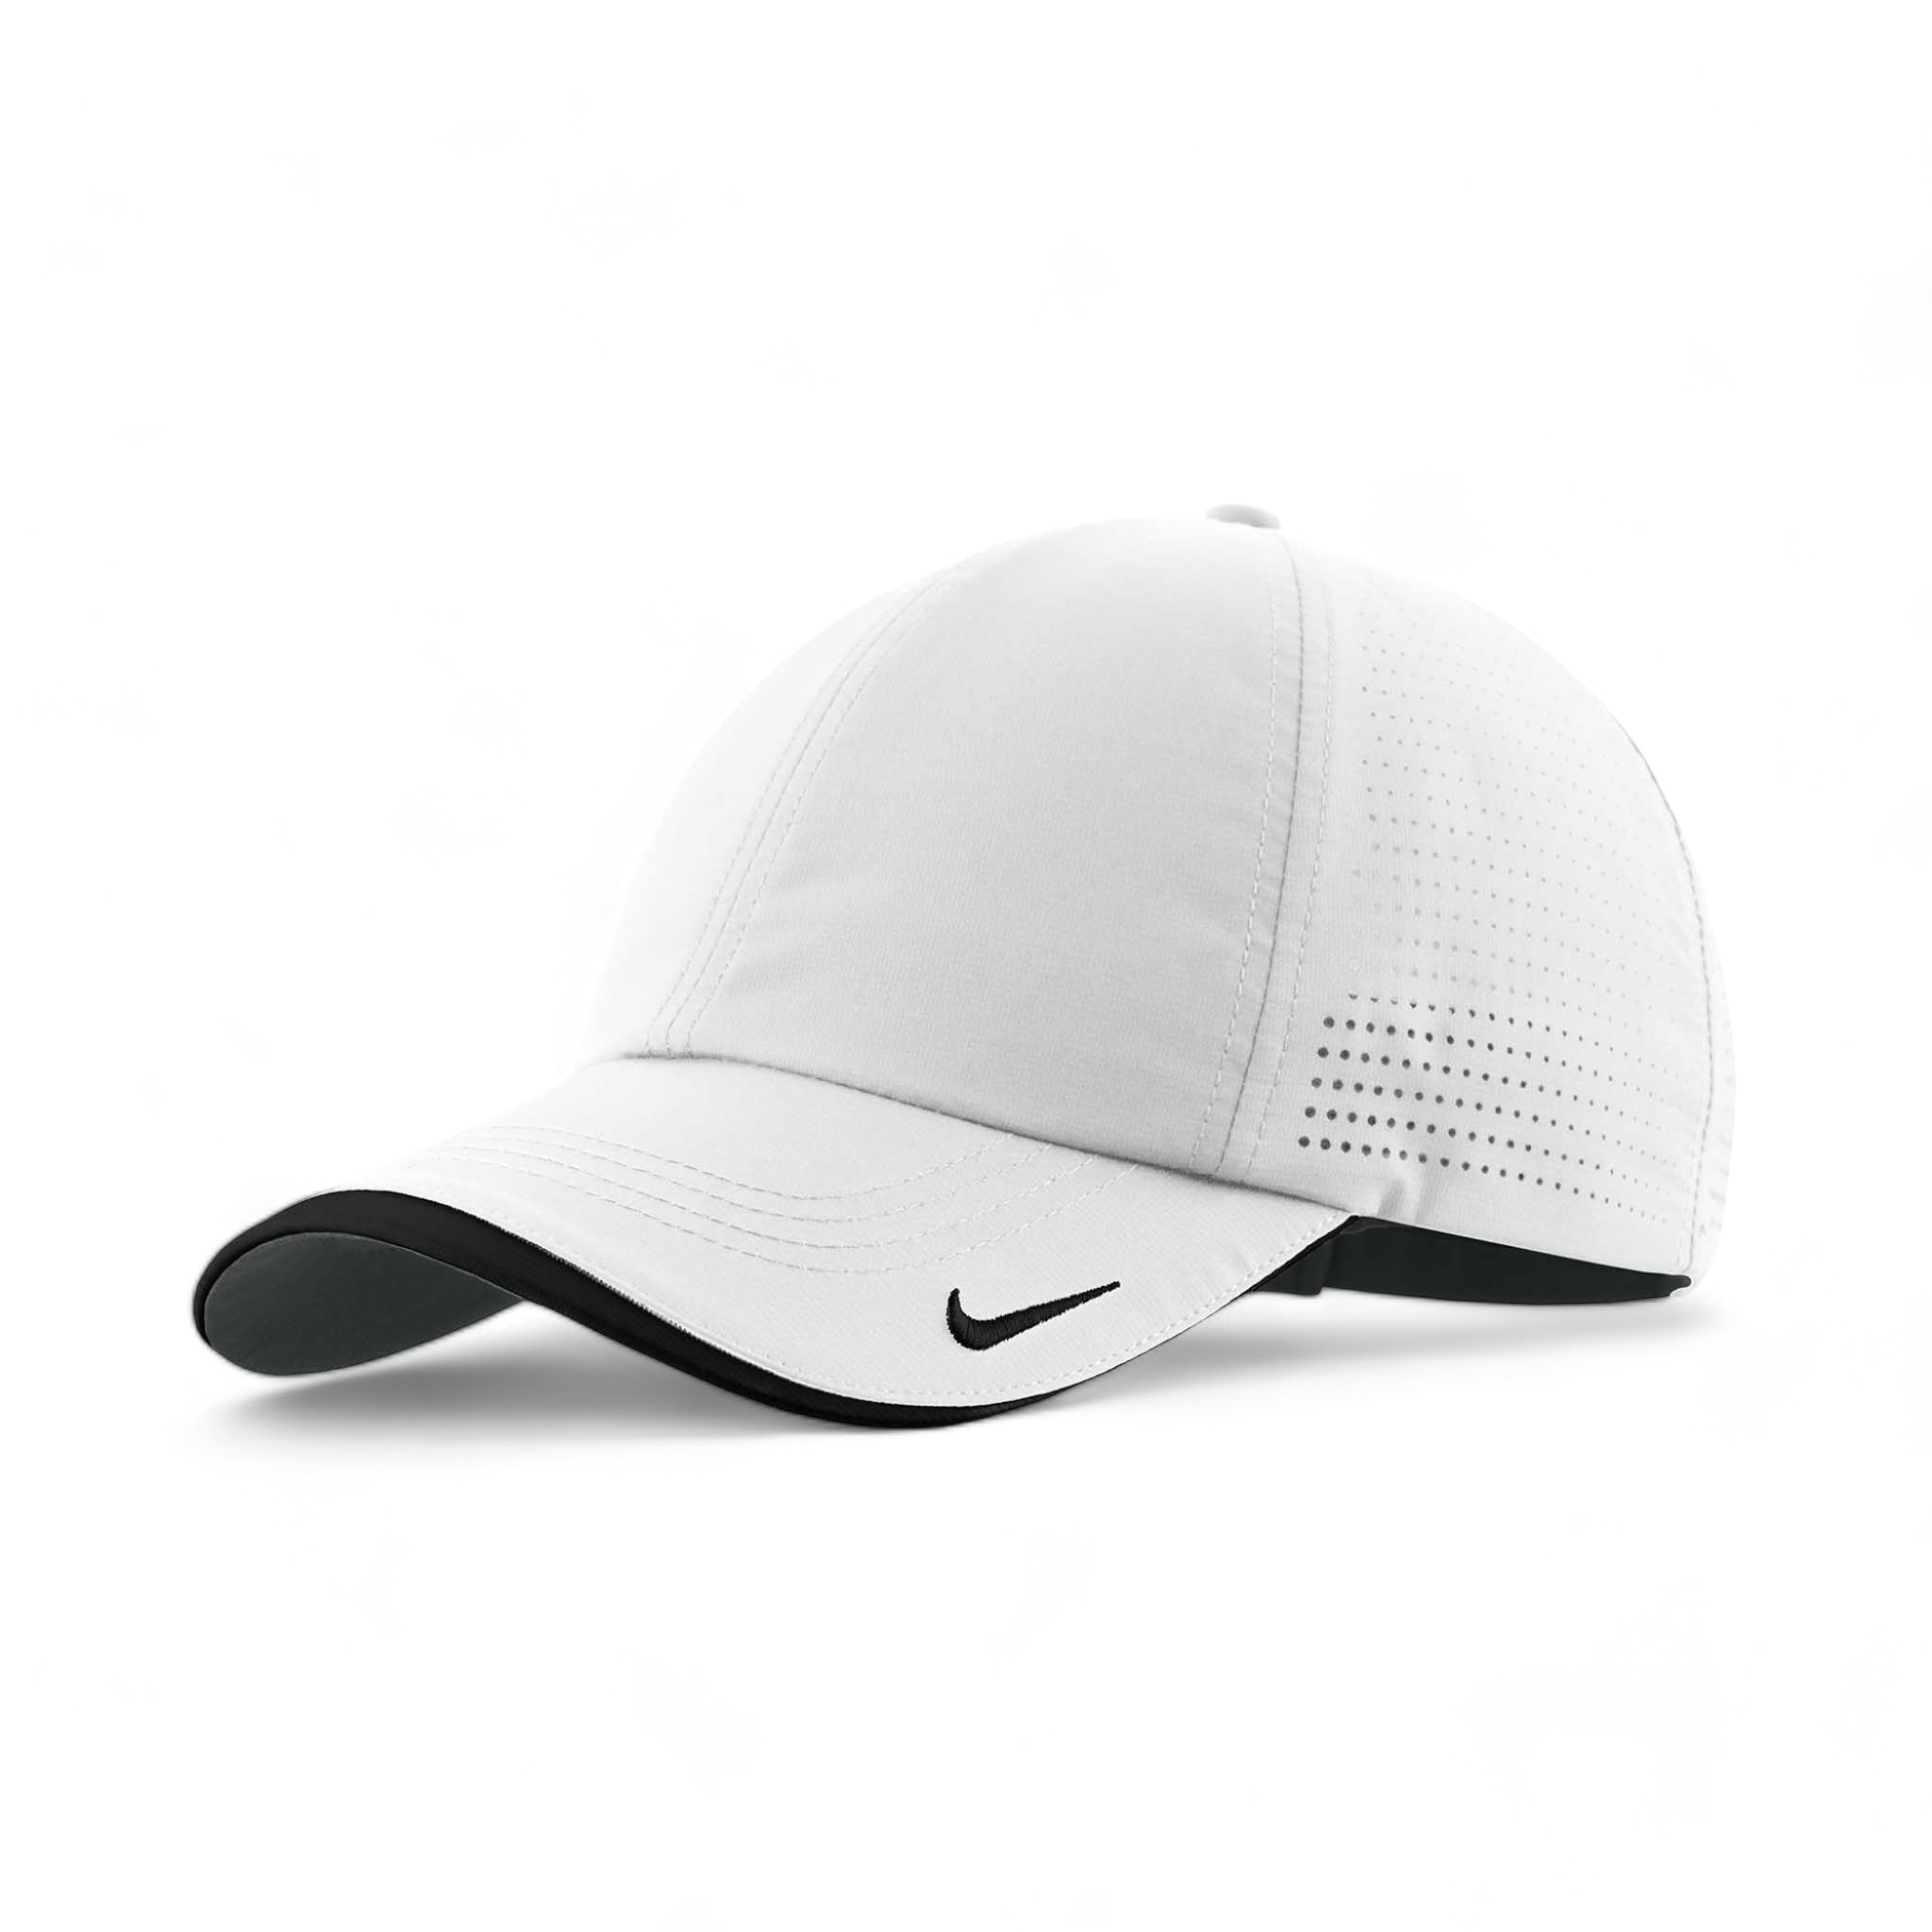 Side view of Nike NKFB6445 custom hat in white and black